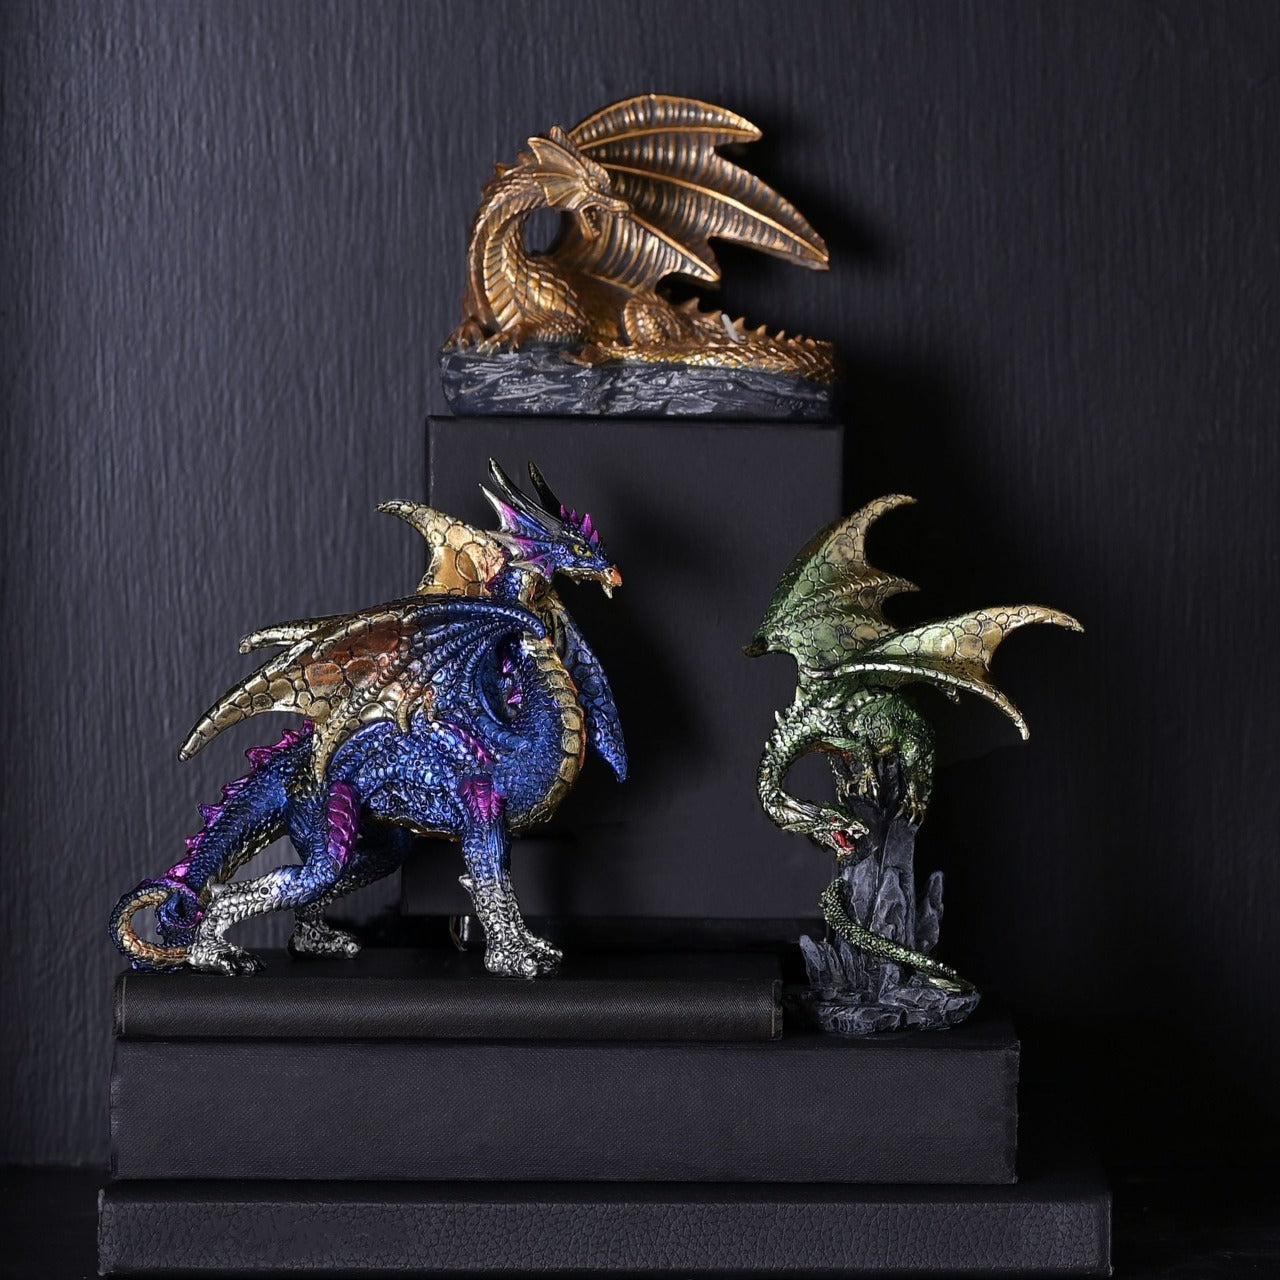 Blue Dragon With Gold Wings Figurine  A blue dragon with gold wings figurine by HOCUS POCUS NOVELTIES®.  This majestic figurine captures the mythical world of dragons for those obsessed with fantasy.